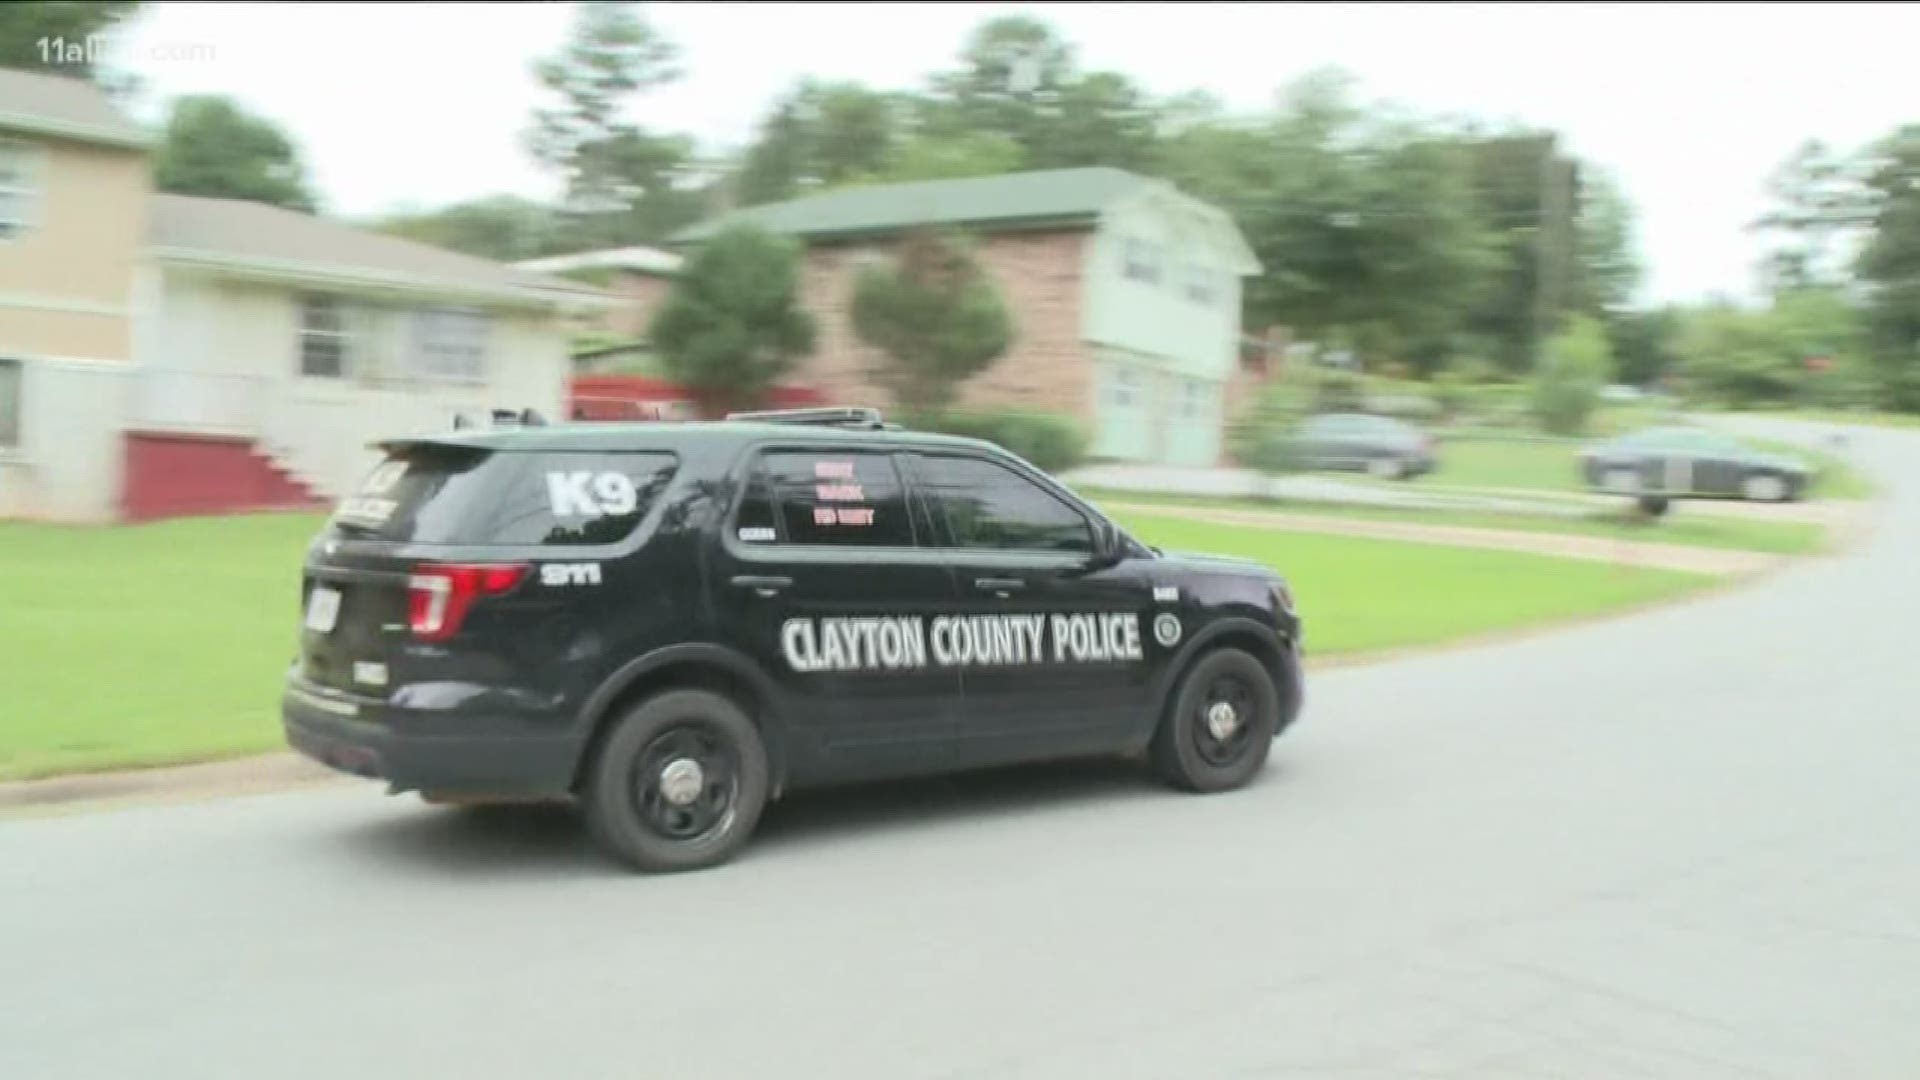 A teen was found lying face-down in the grass in Clayton County on Thursday night.